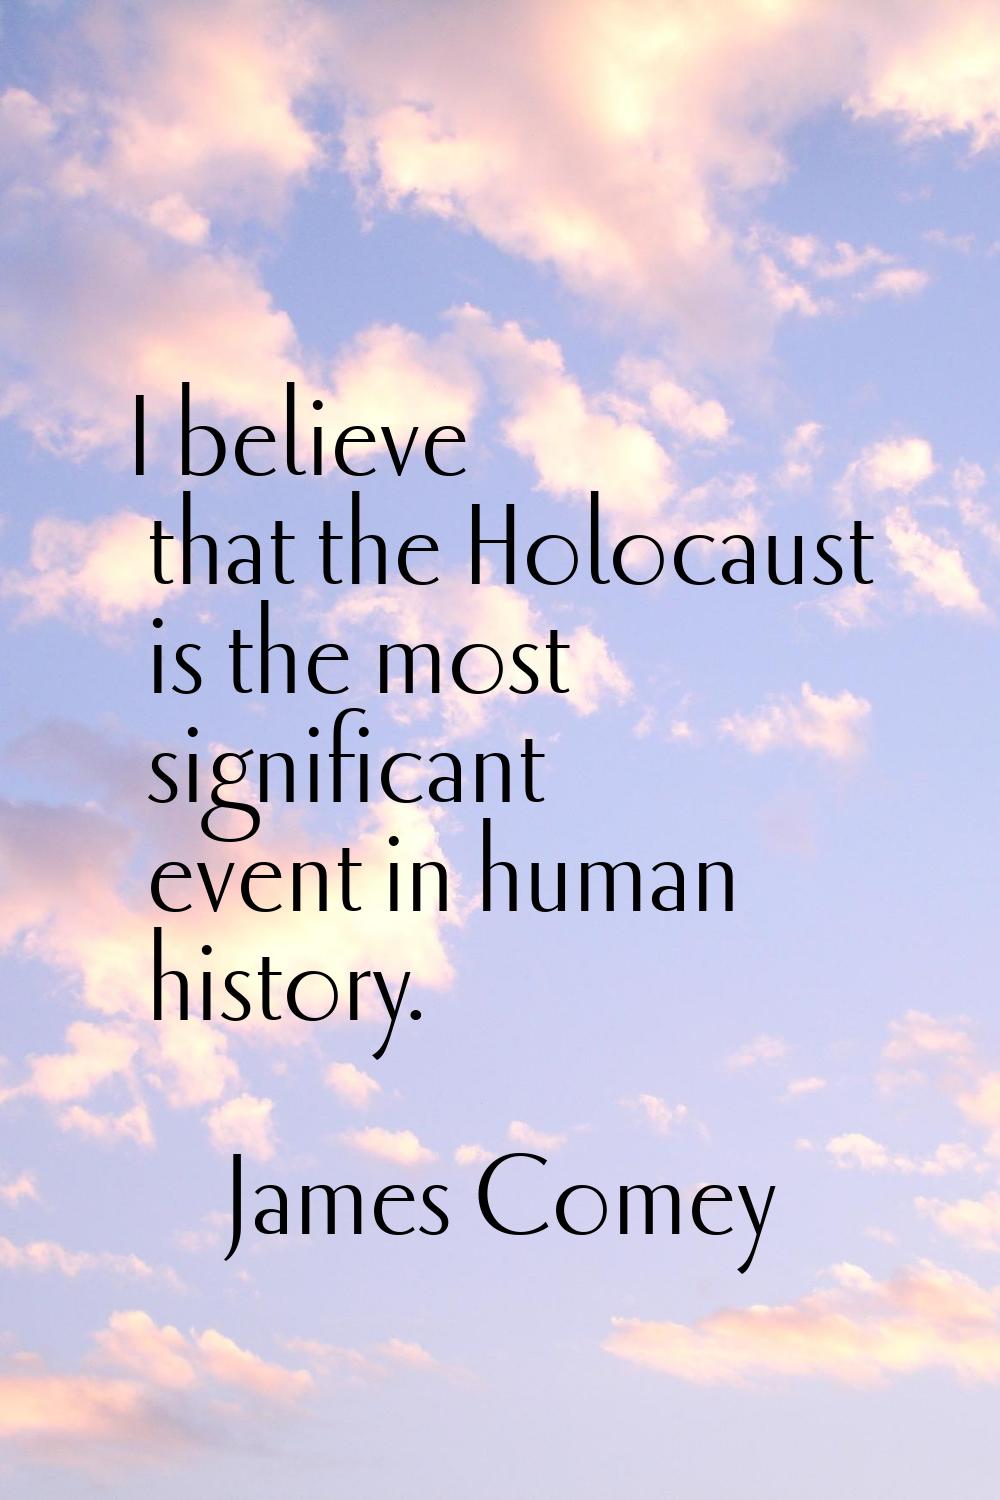 I believe that the Holocaust is the most significant event in human history.